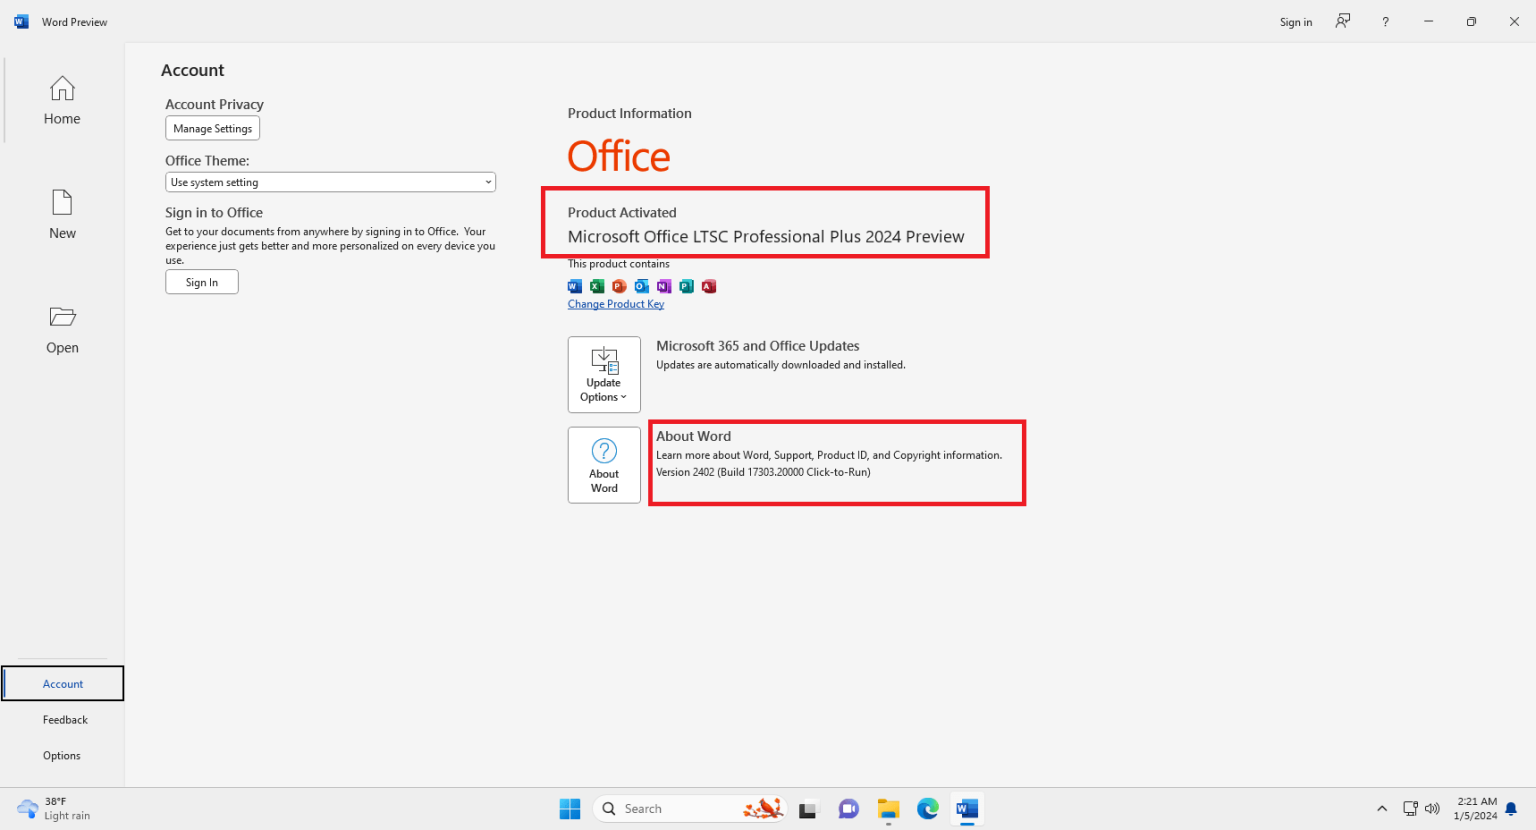 Microsoft Office 2024 Version 2402 Build 17311.20000 Preview